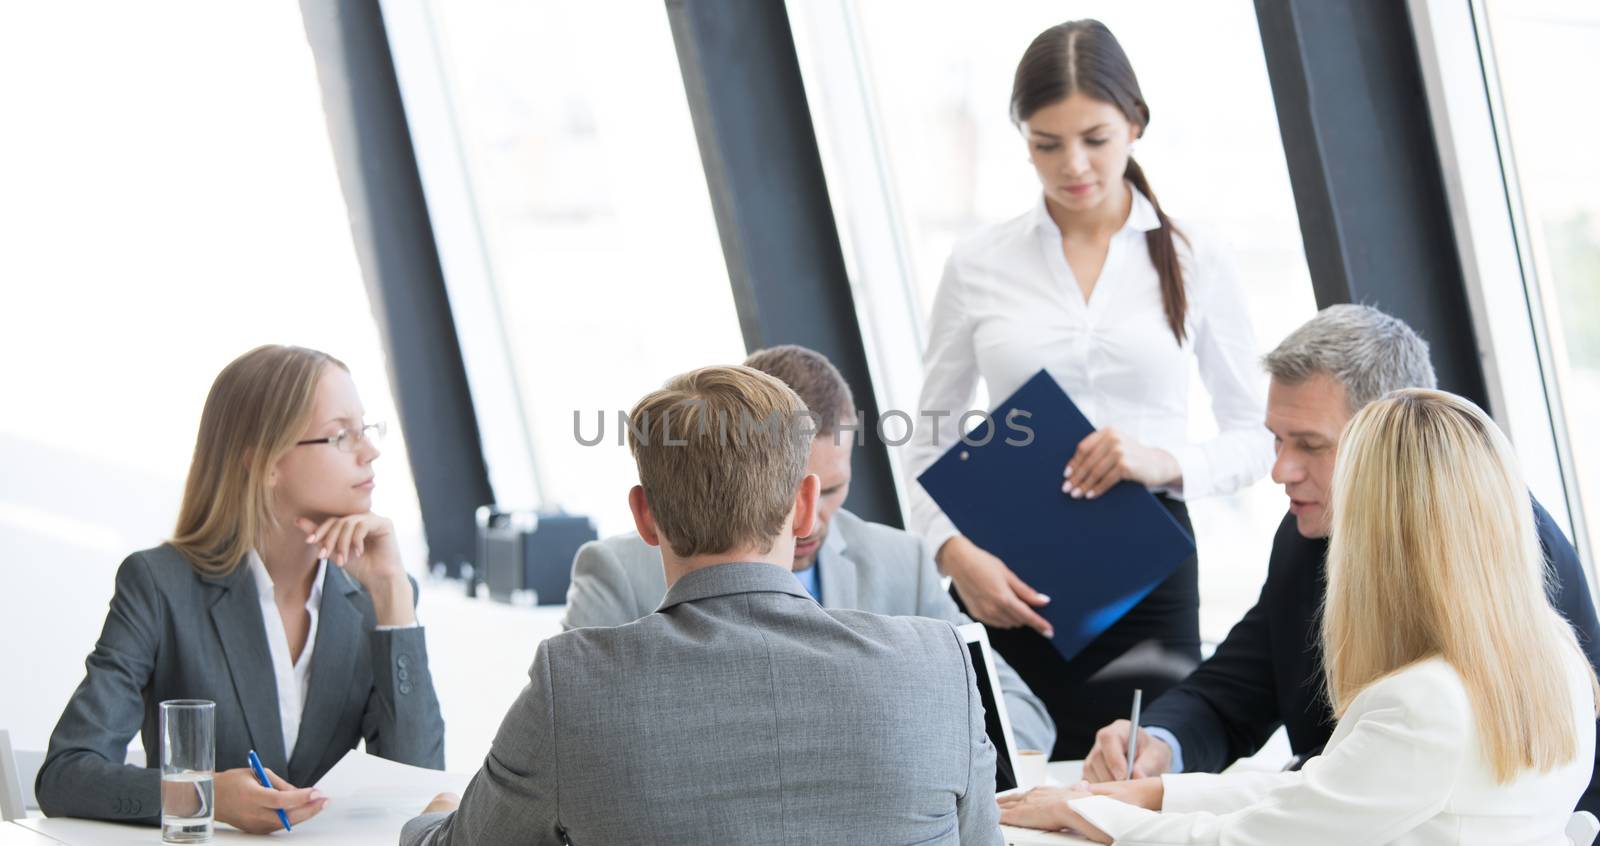 Business person group in formalwear discuss documents at meeting in modern office